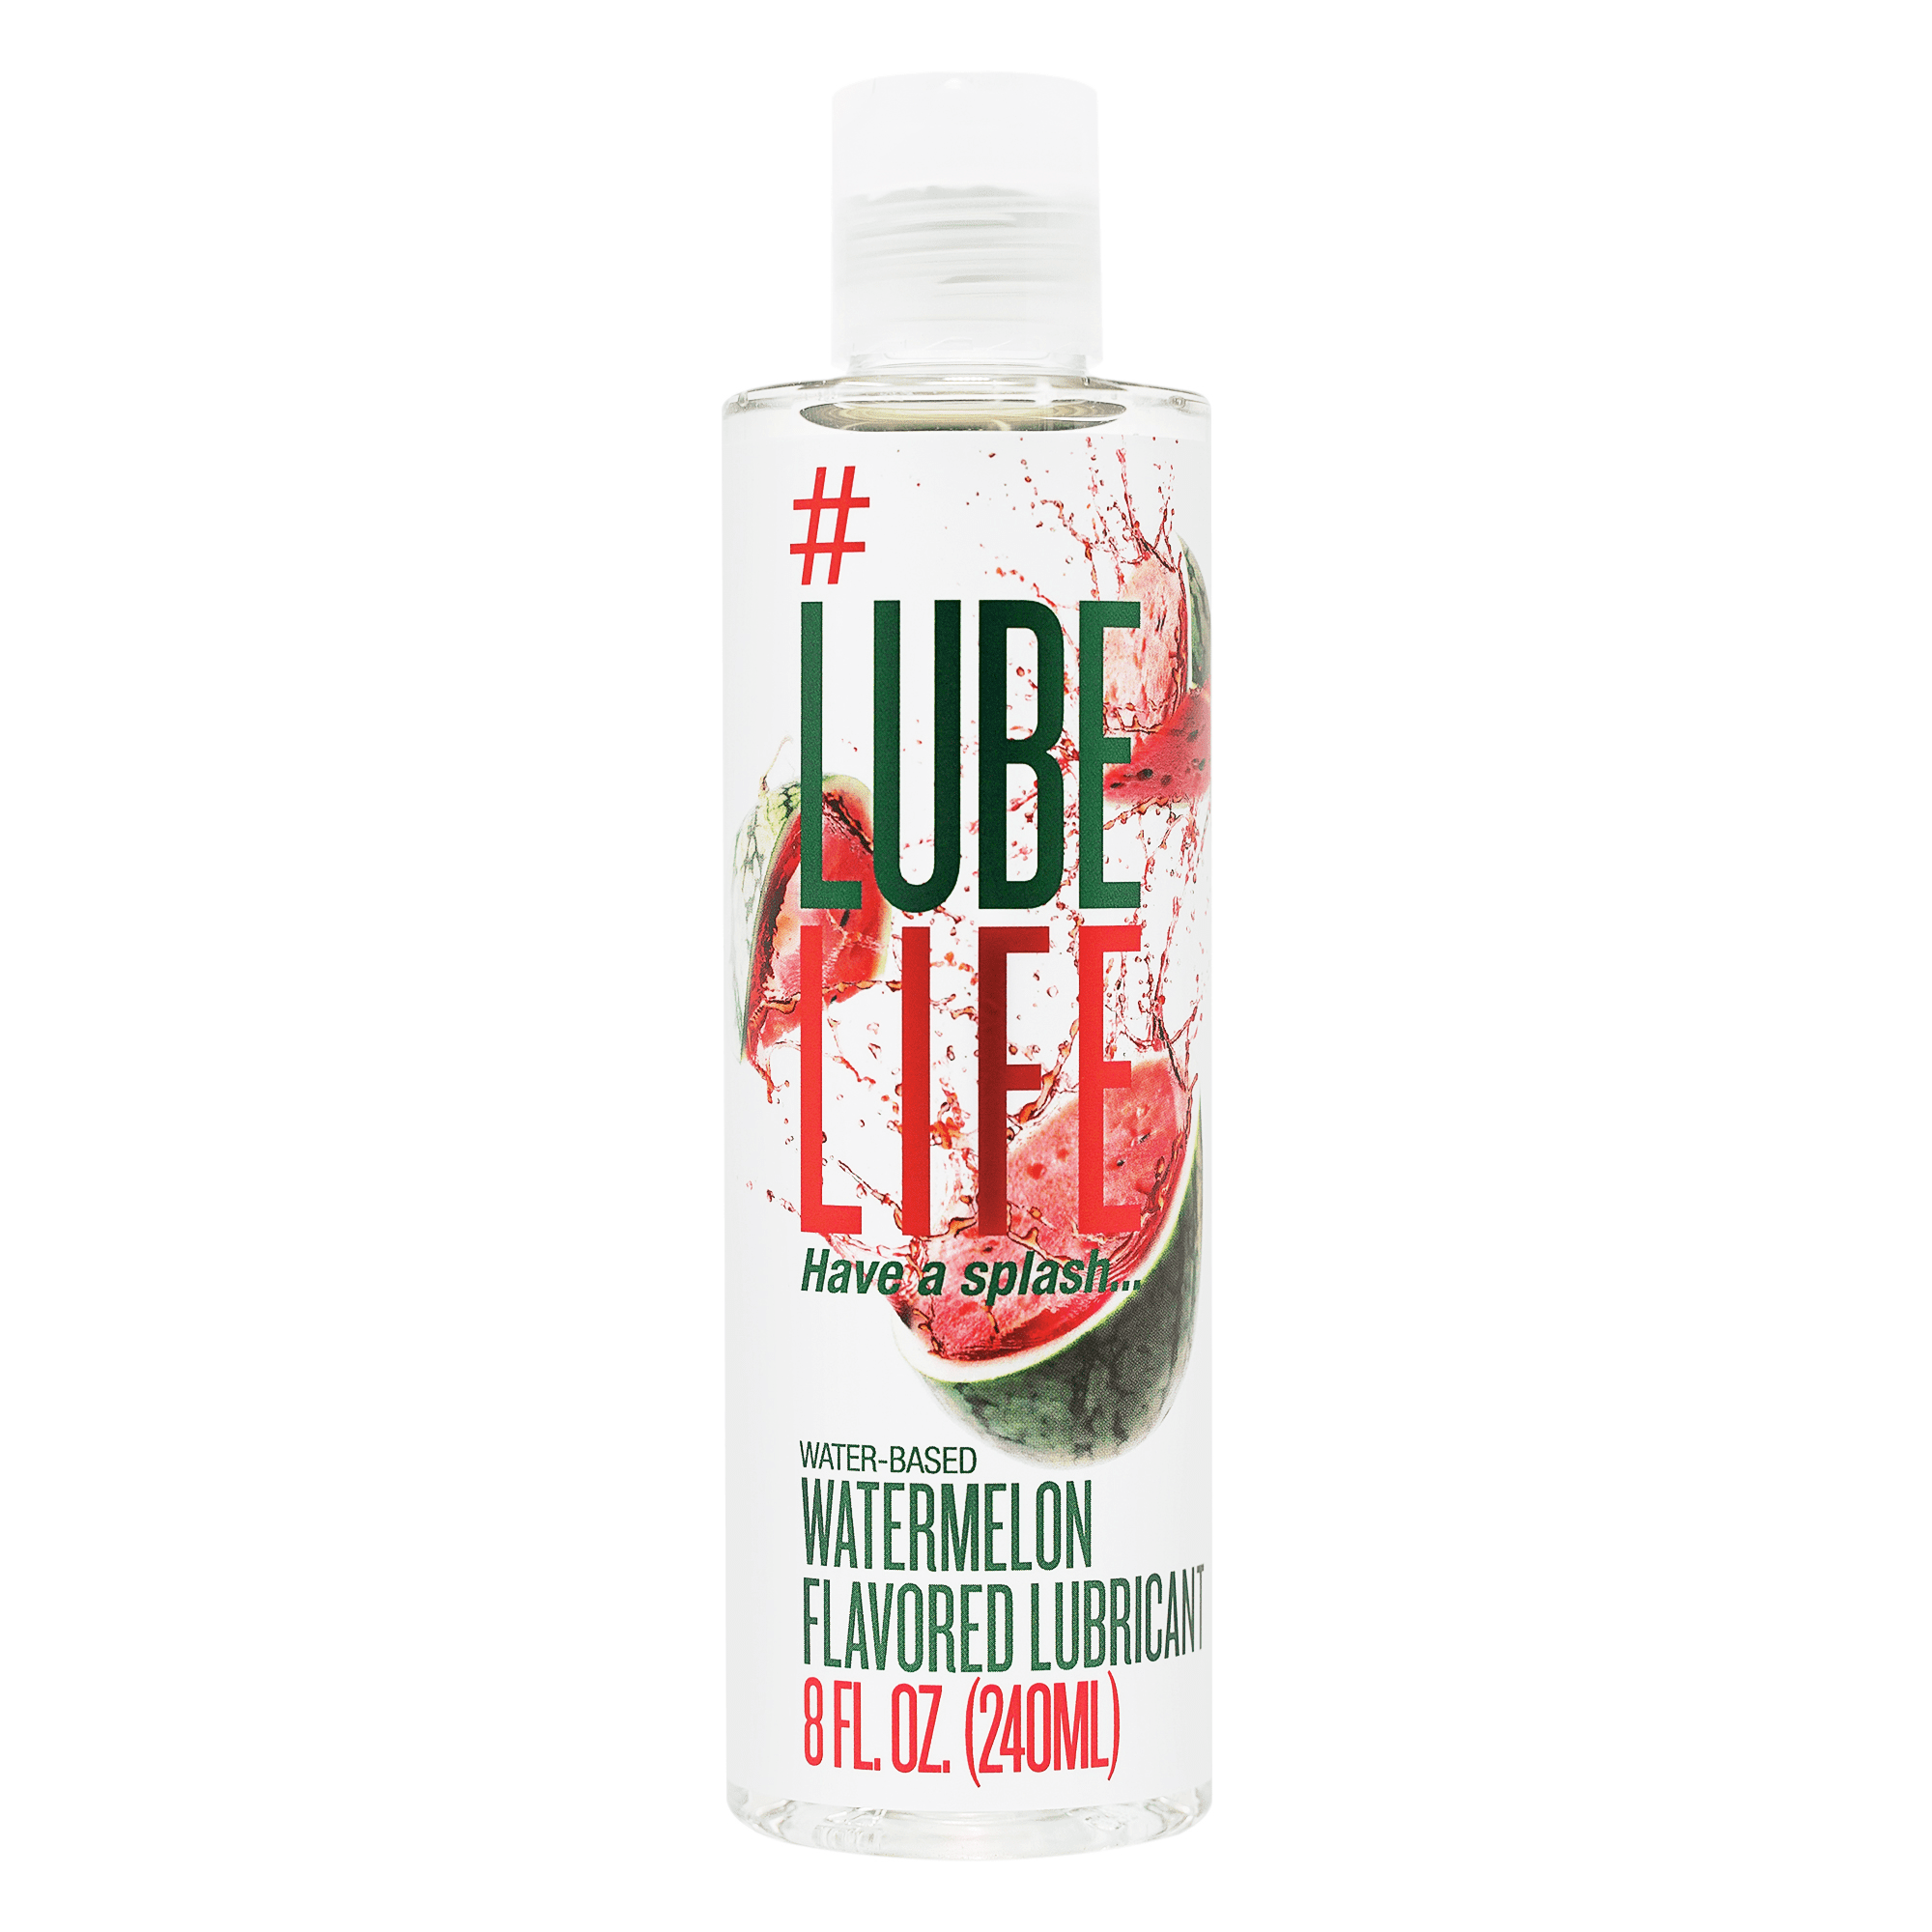 Lube Life Water-Based Strawberry Flavored Lubricant, Personal Lube for Men, Women and Couples, Made Without Added Sugar, 8 fl oz